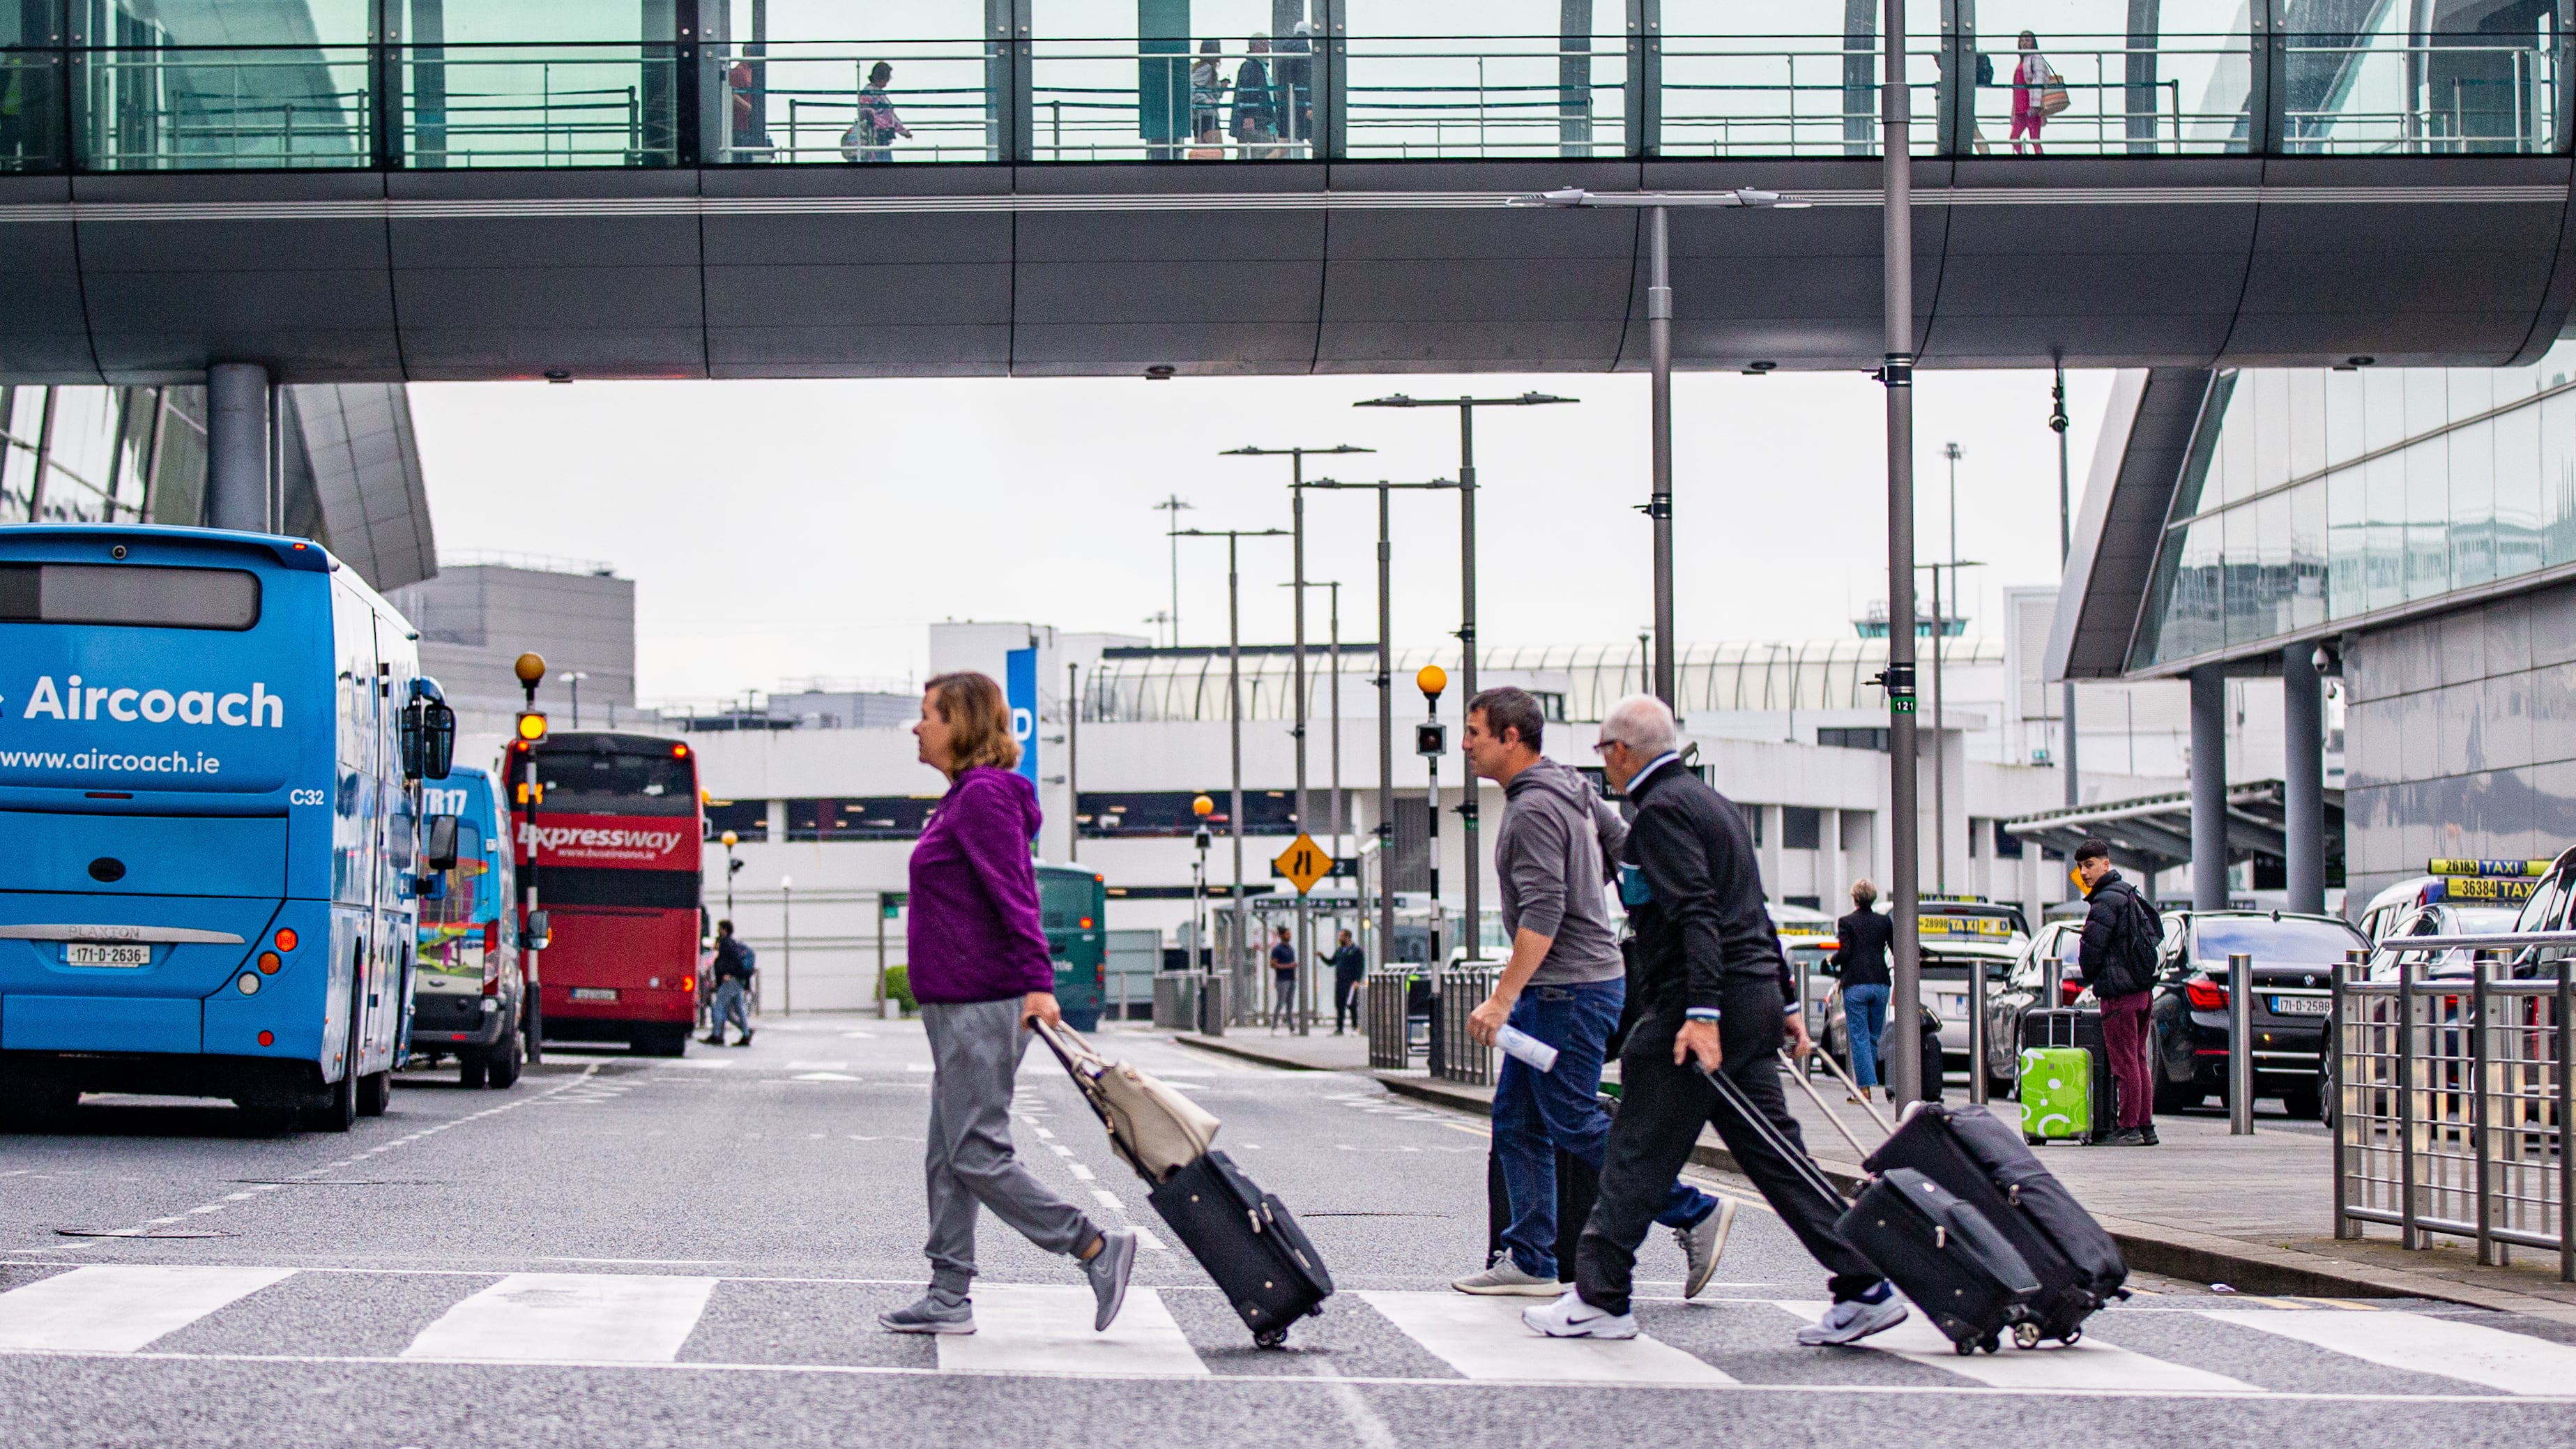 Dublin Airport has been fined 6.7m euro for poor cleanliness of terminals and washroom facilities, and for security queue times, the Irish Aviation Authority said